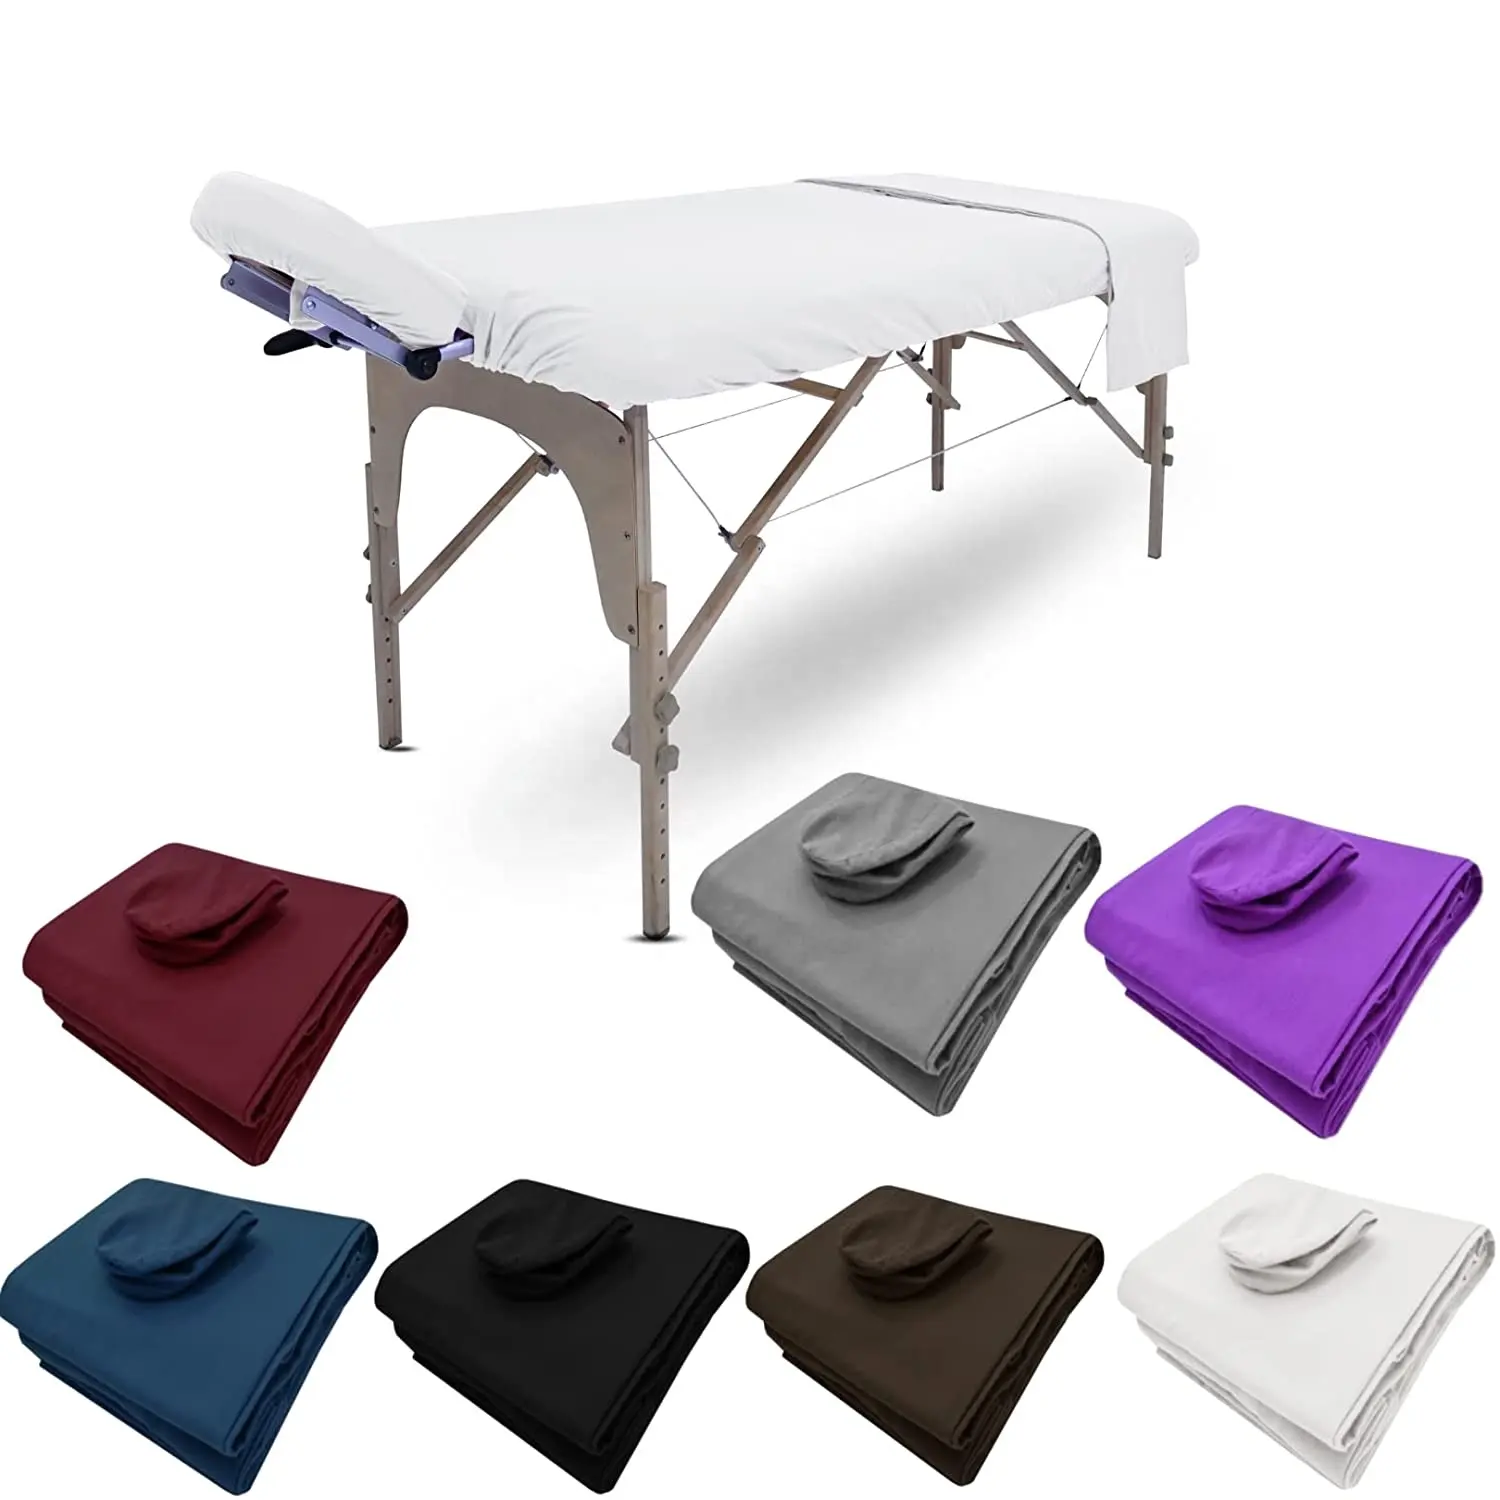 Wholesale White Poly Cotton Massage Table Flat Sheets Fitted Sheets 3 Pieces Set